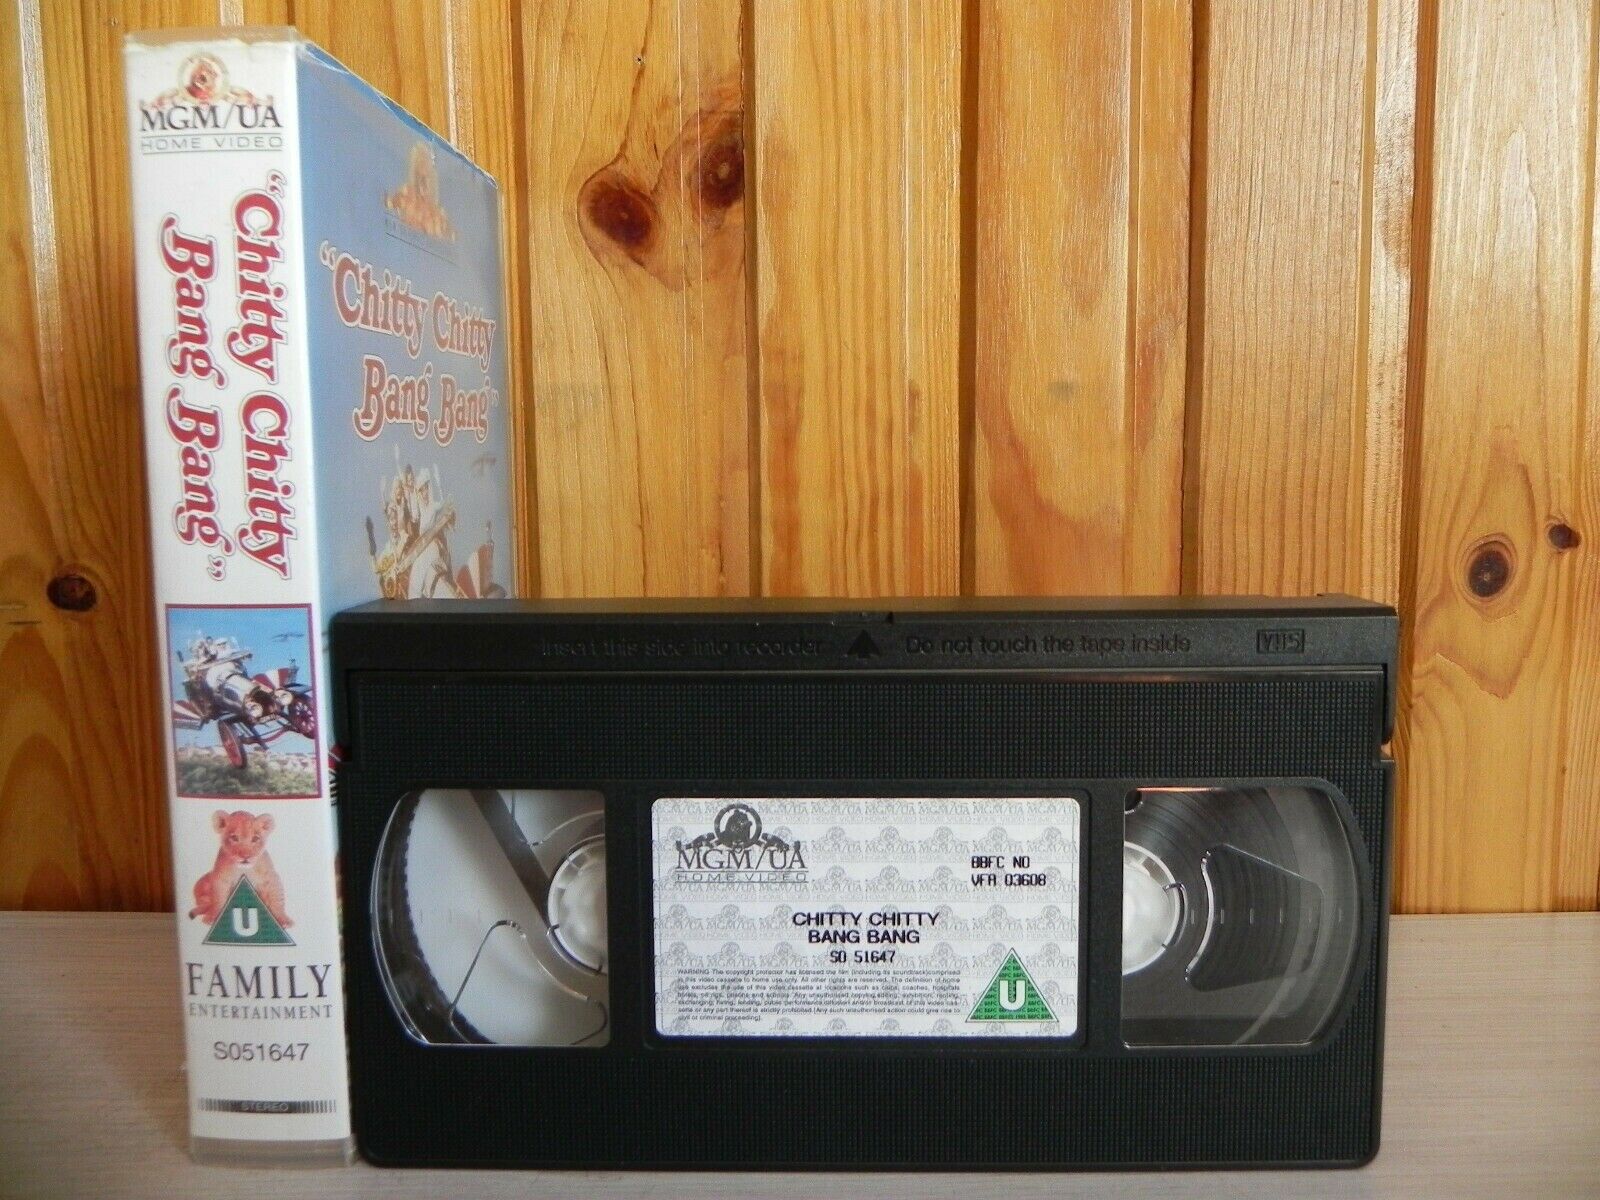 Chitty Chitty Bang Bang - MGM/UA - Classic Film For All The Familly - Pal VHS-